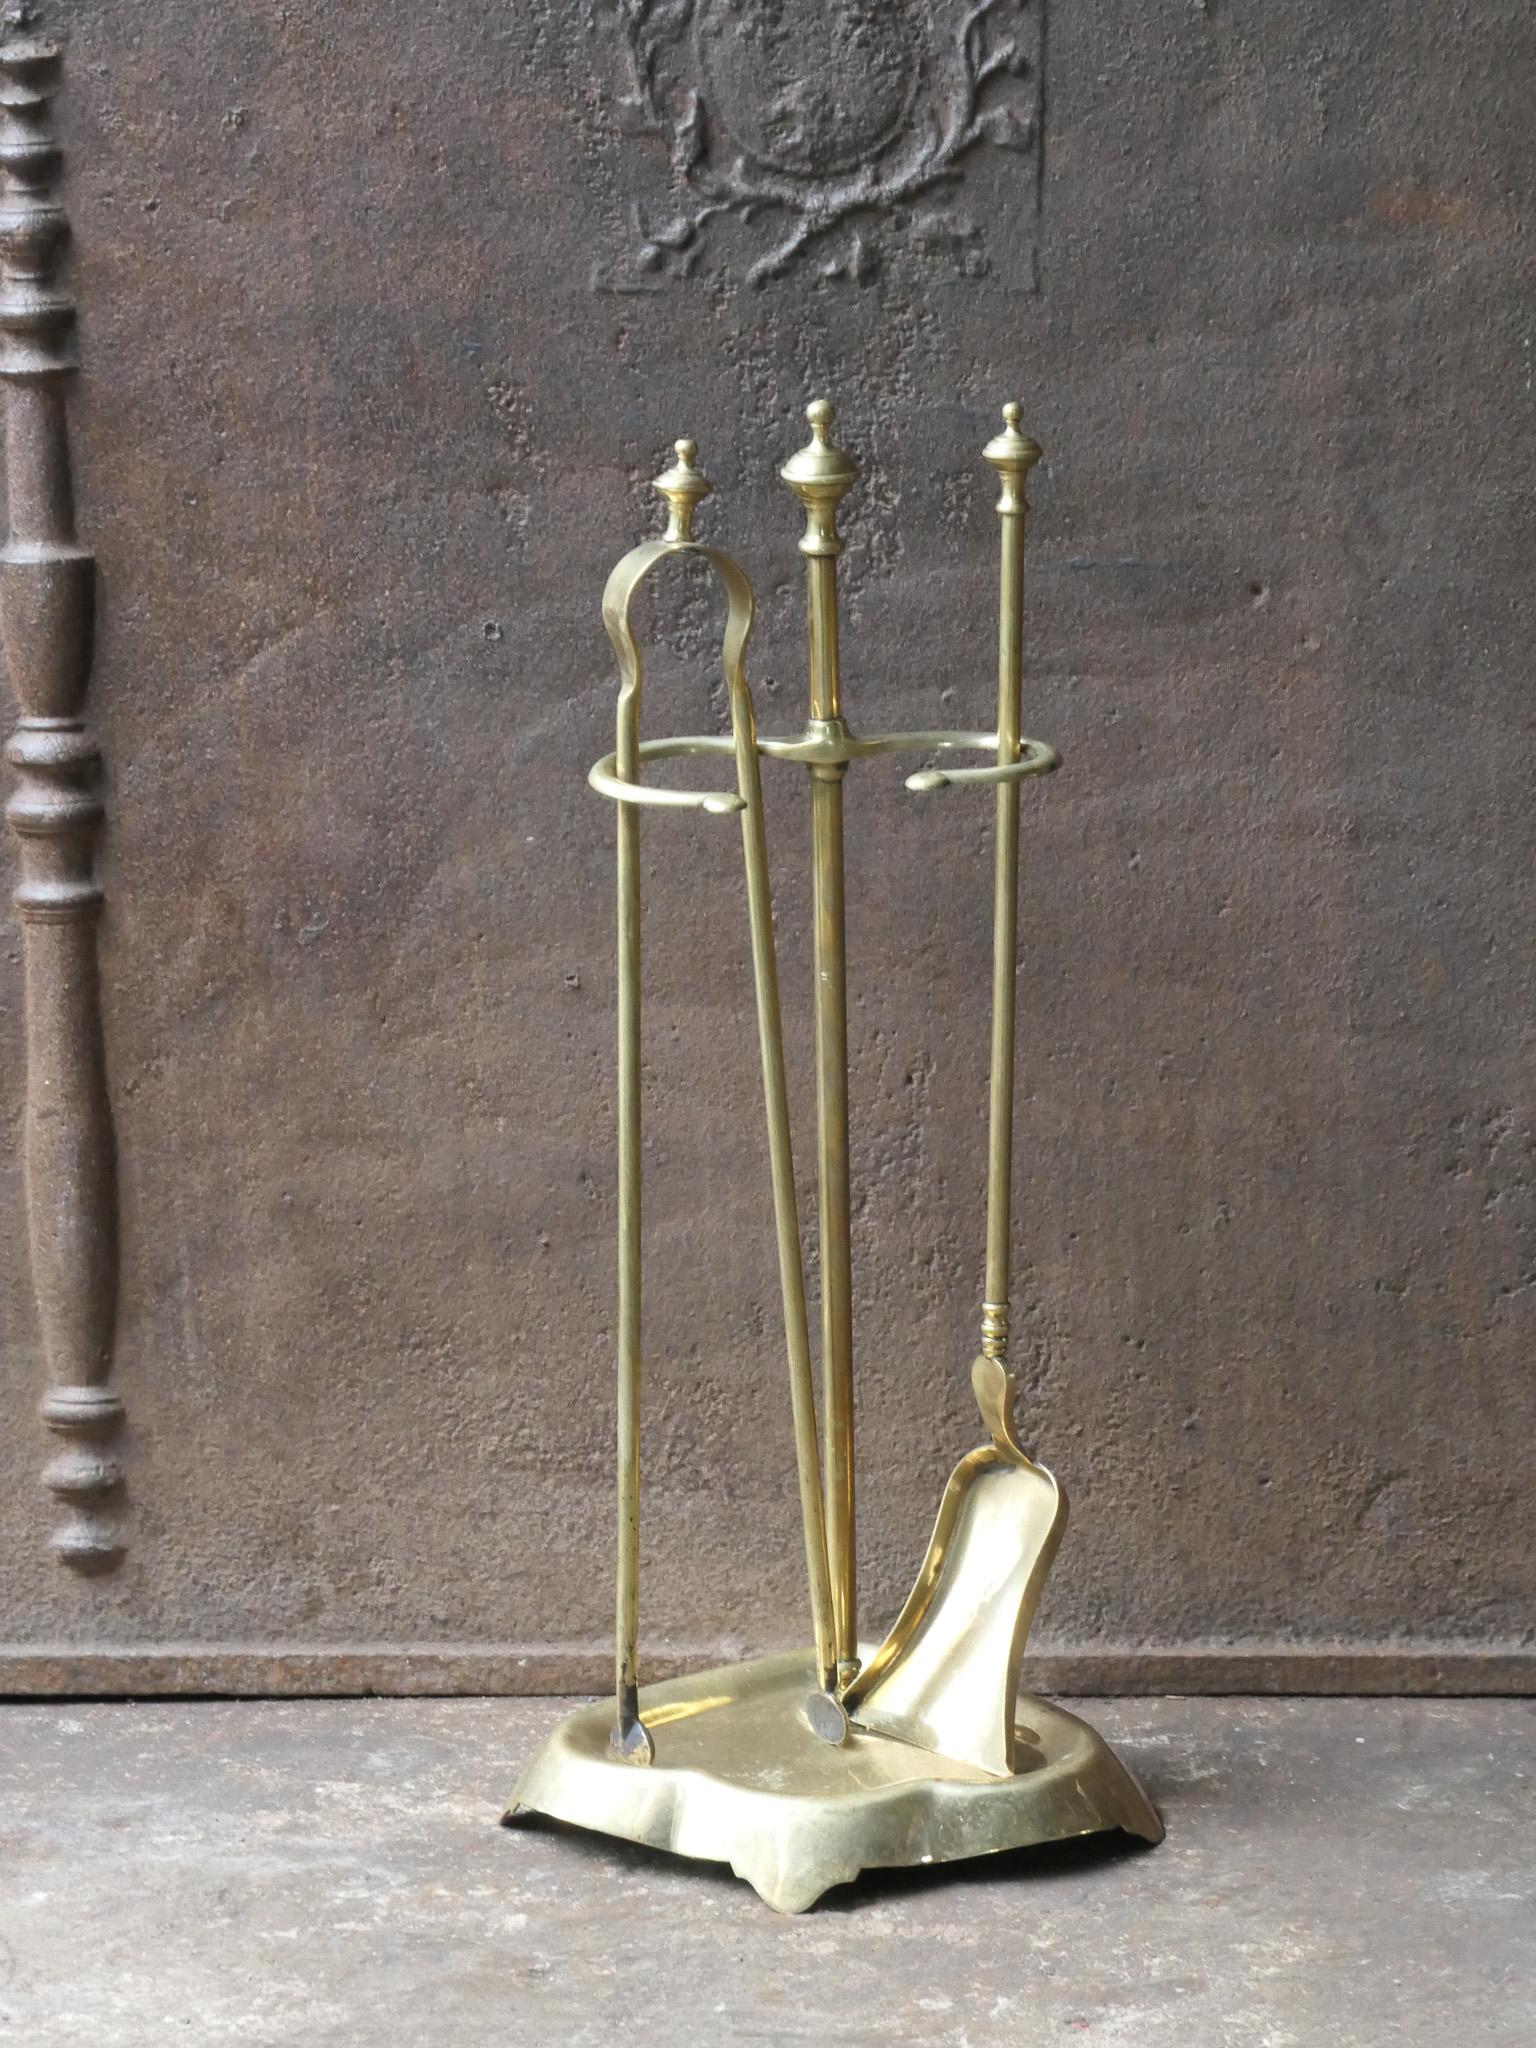 19th century French Napoleon III fireplace tool set - fire irons made of brass. Bouhon Frères were prominent French producers of fireplace tools in the 19th century. The firm participated in the 1878 and 1900 Paris Expositions Universelles. The